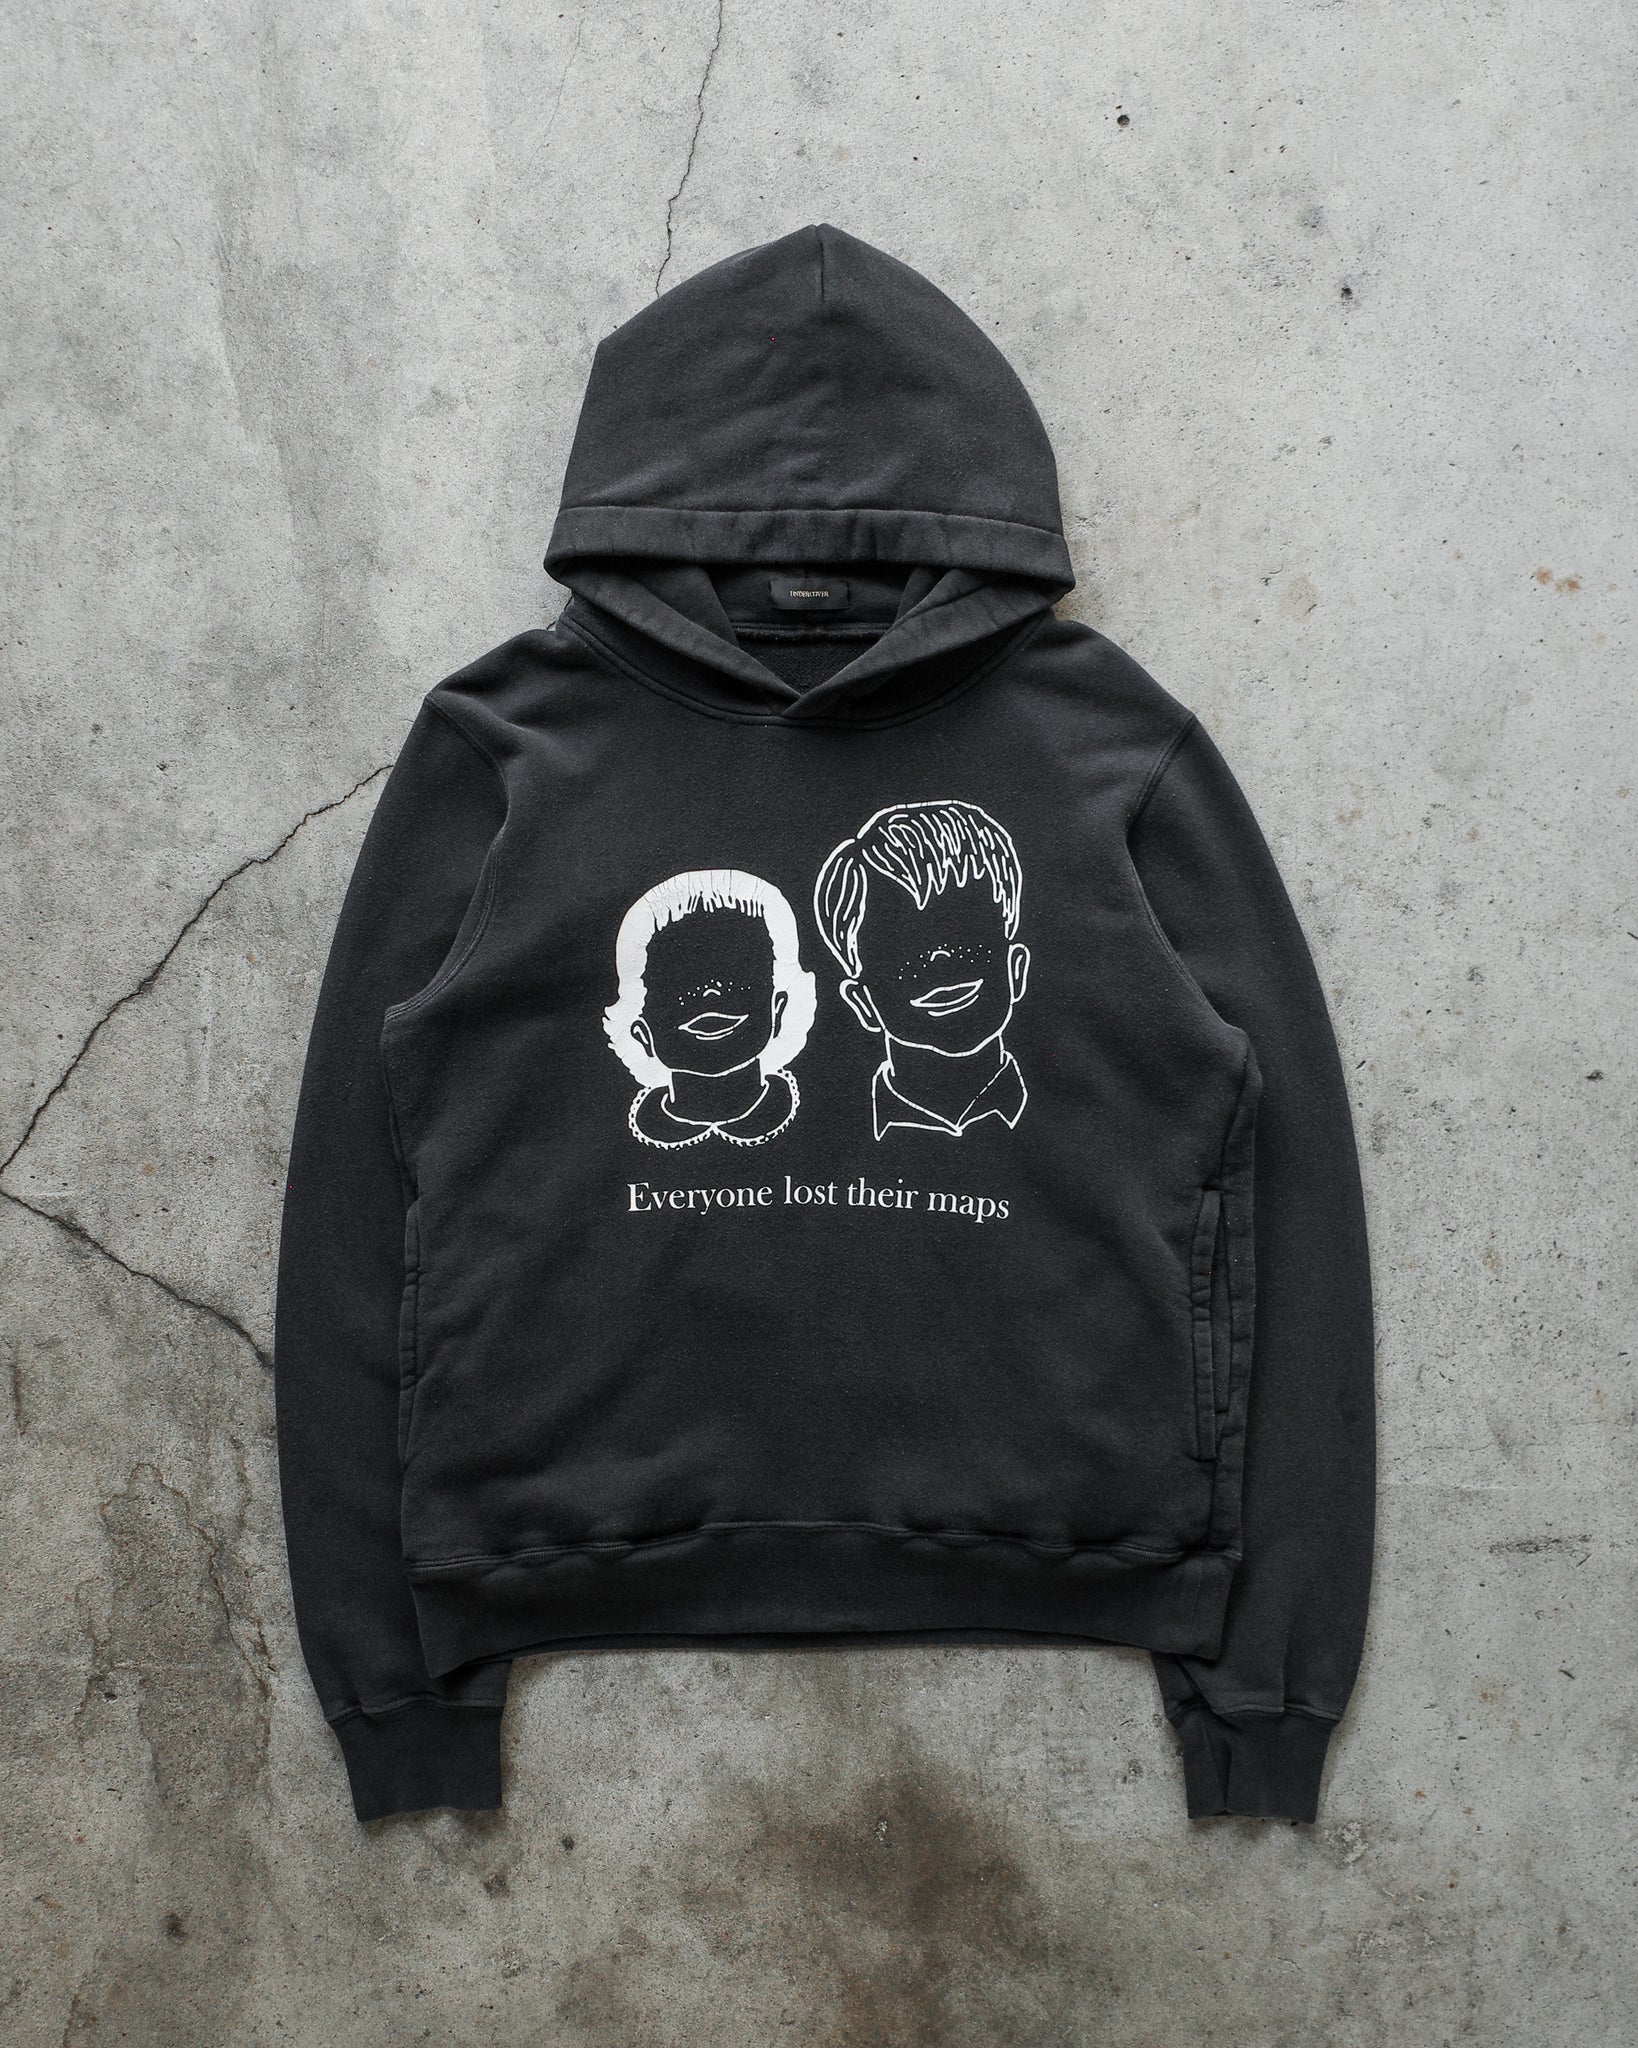 Undercover AW17 "everyone lost their maps" Hoodie